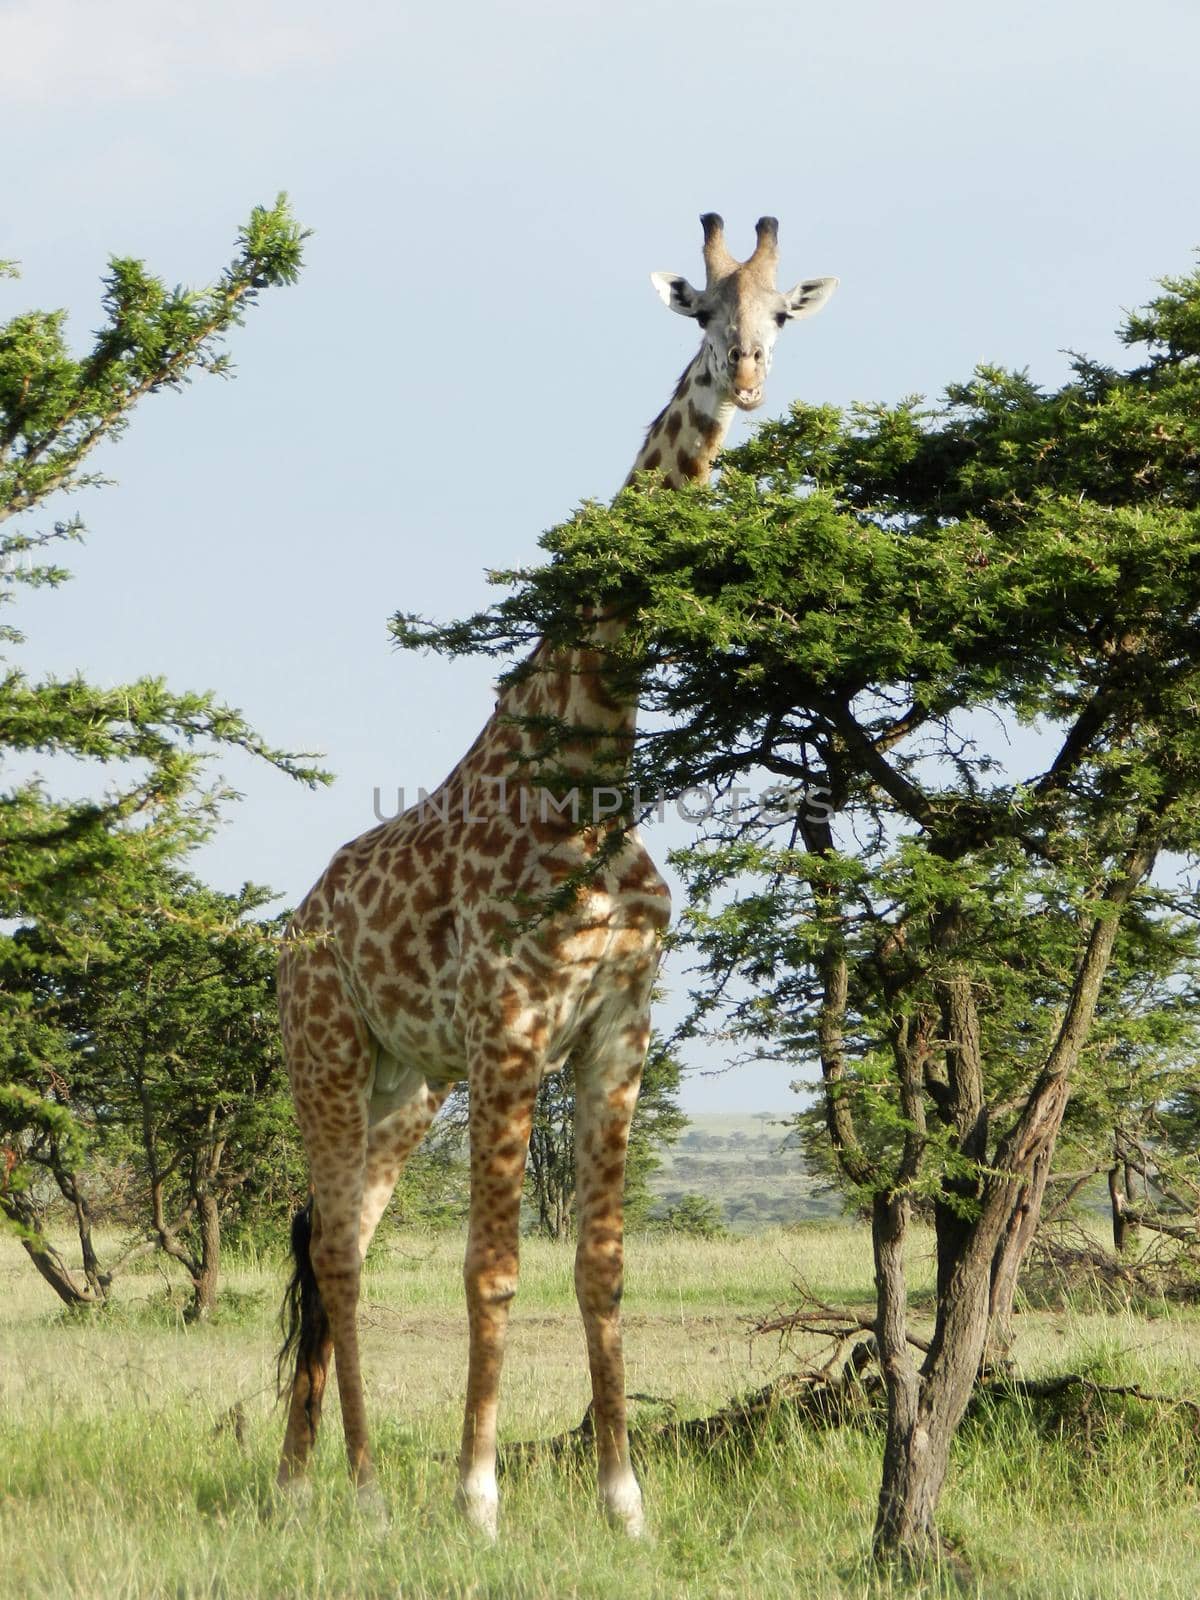 Lonely giraffe eating acacia leaves in the African savannah by silentstock639